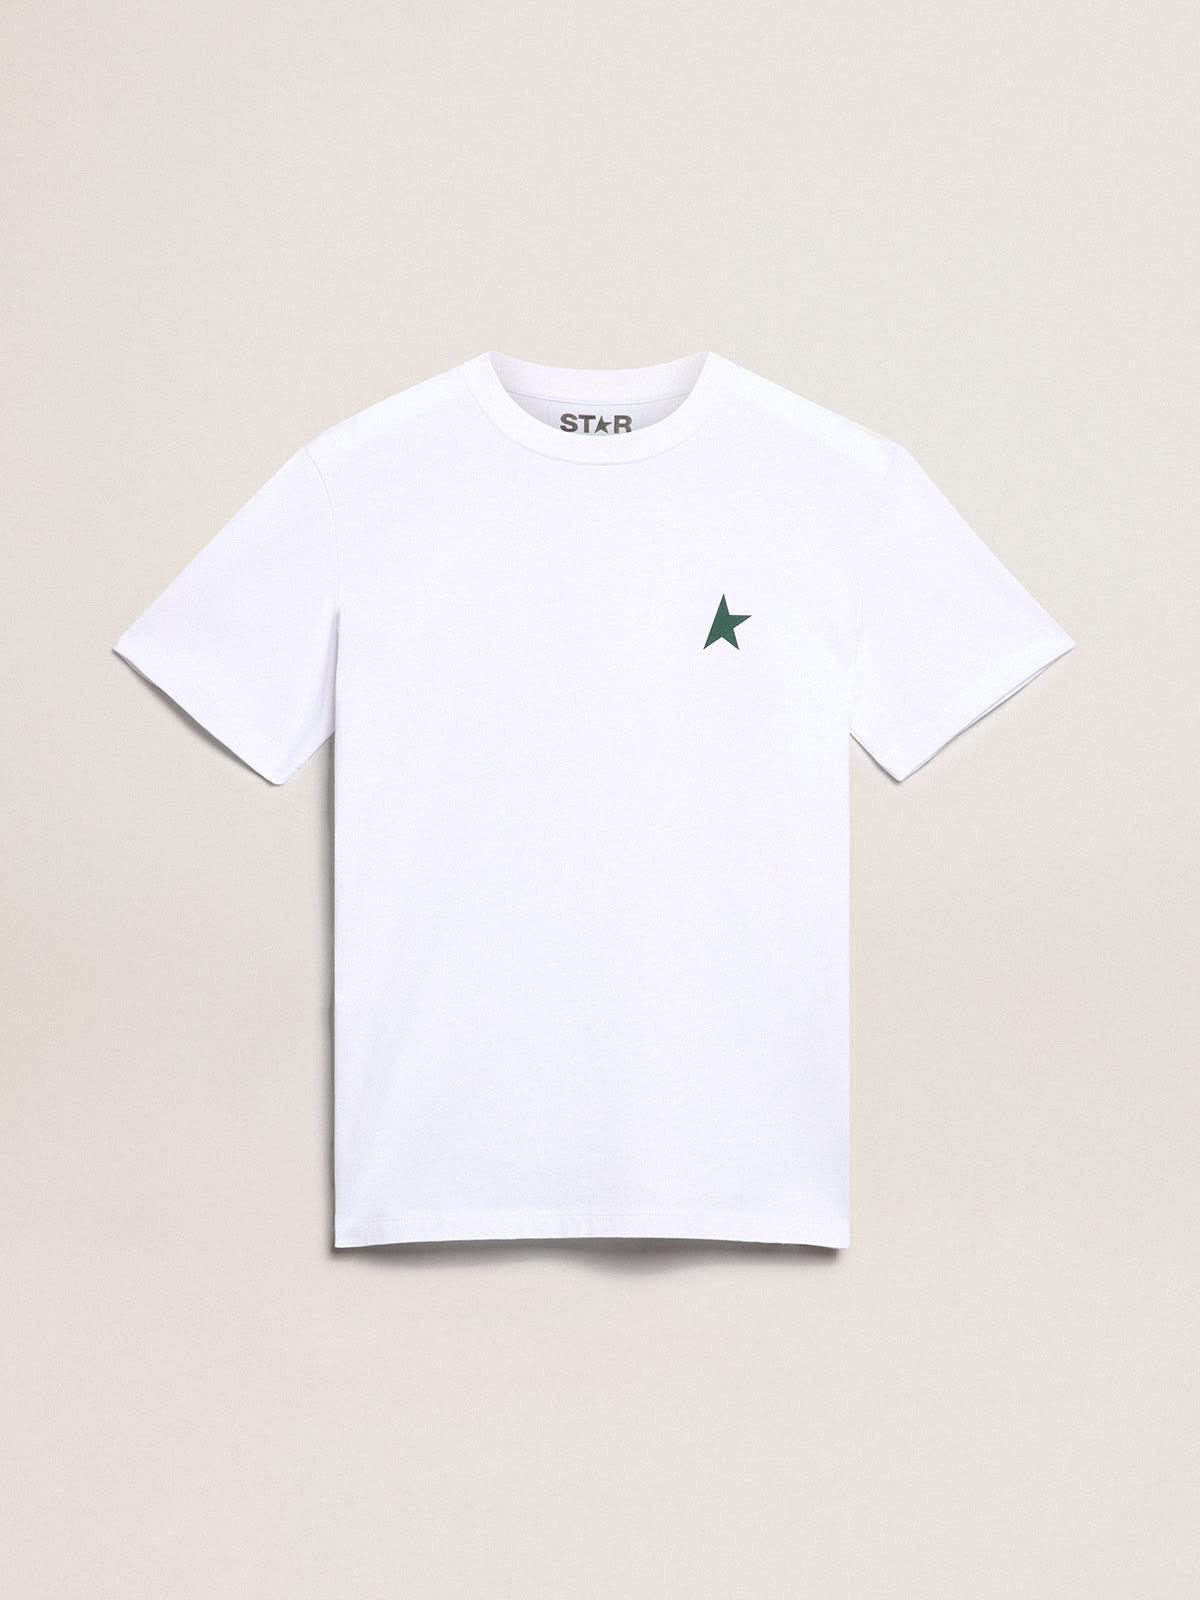 Golden Goose - Women's white T-shirt with green star on the front in 